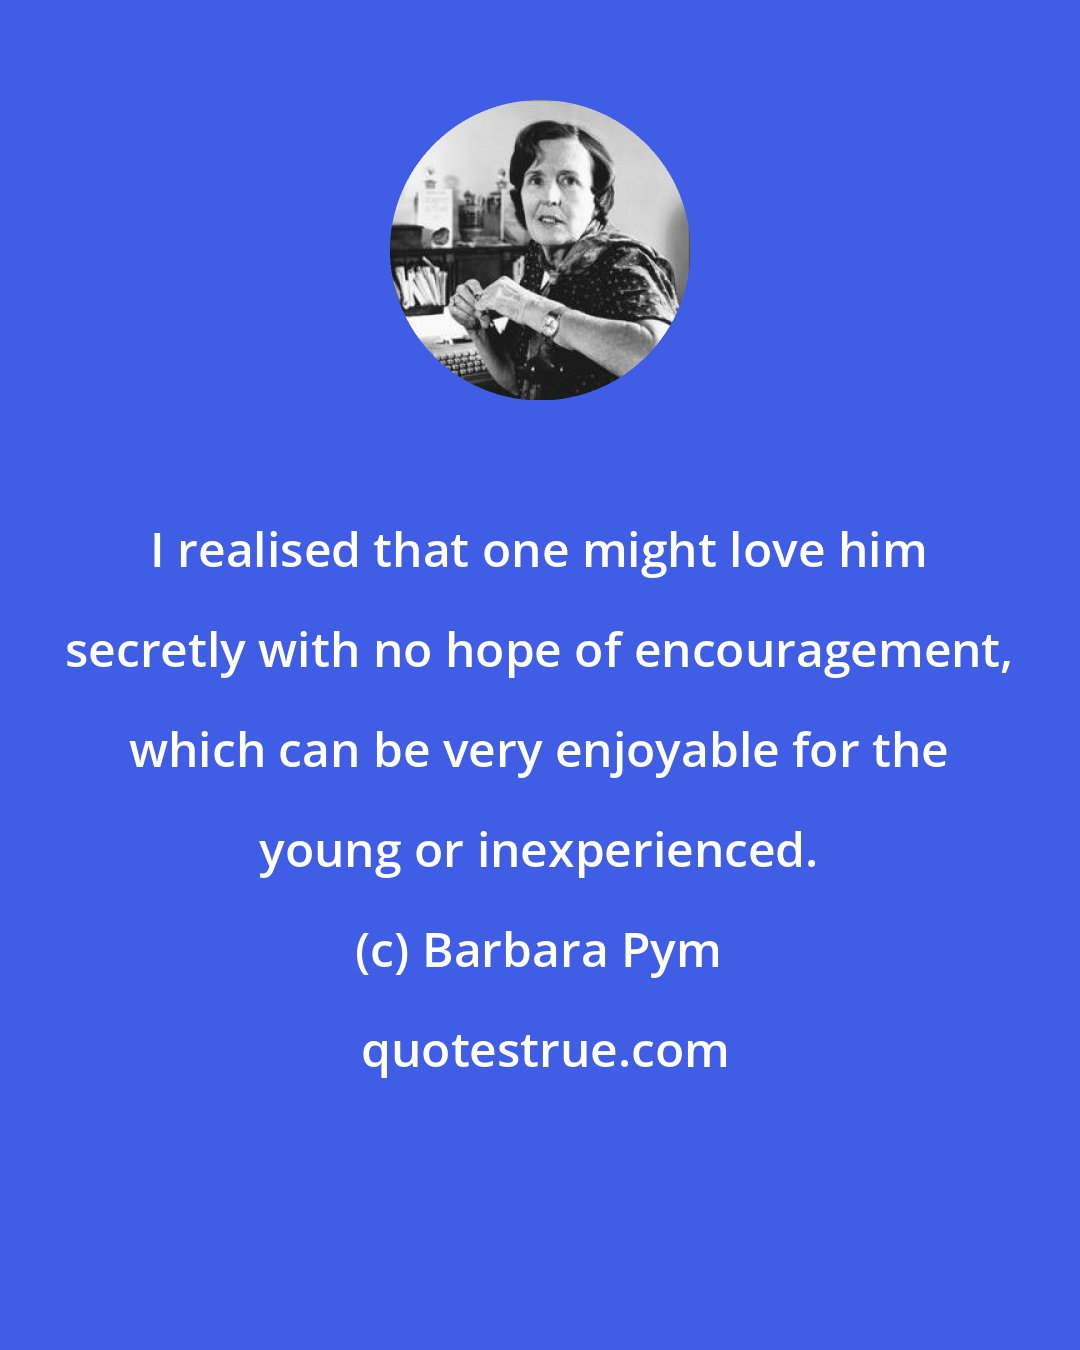 Barbara Pym: I realised that one might love him secretly with no hope of encouragement, which can be very enjoyable for the young or inexperienced.